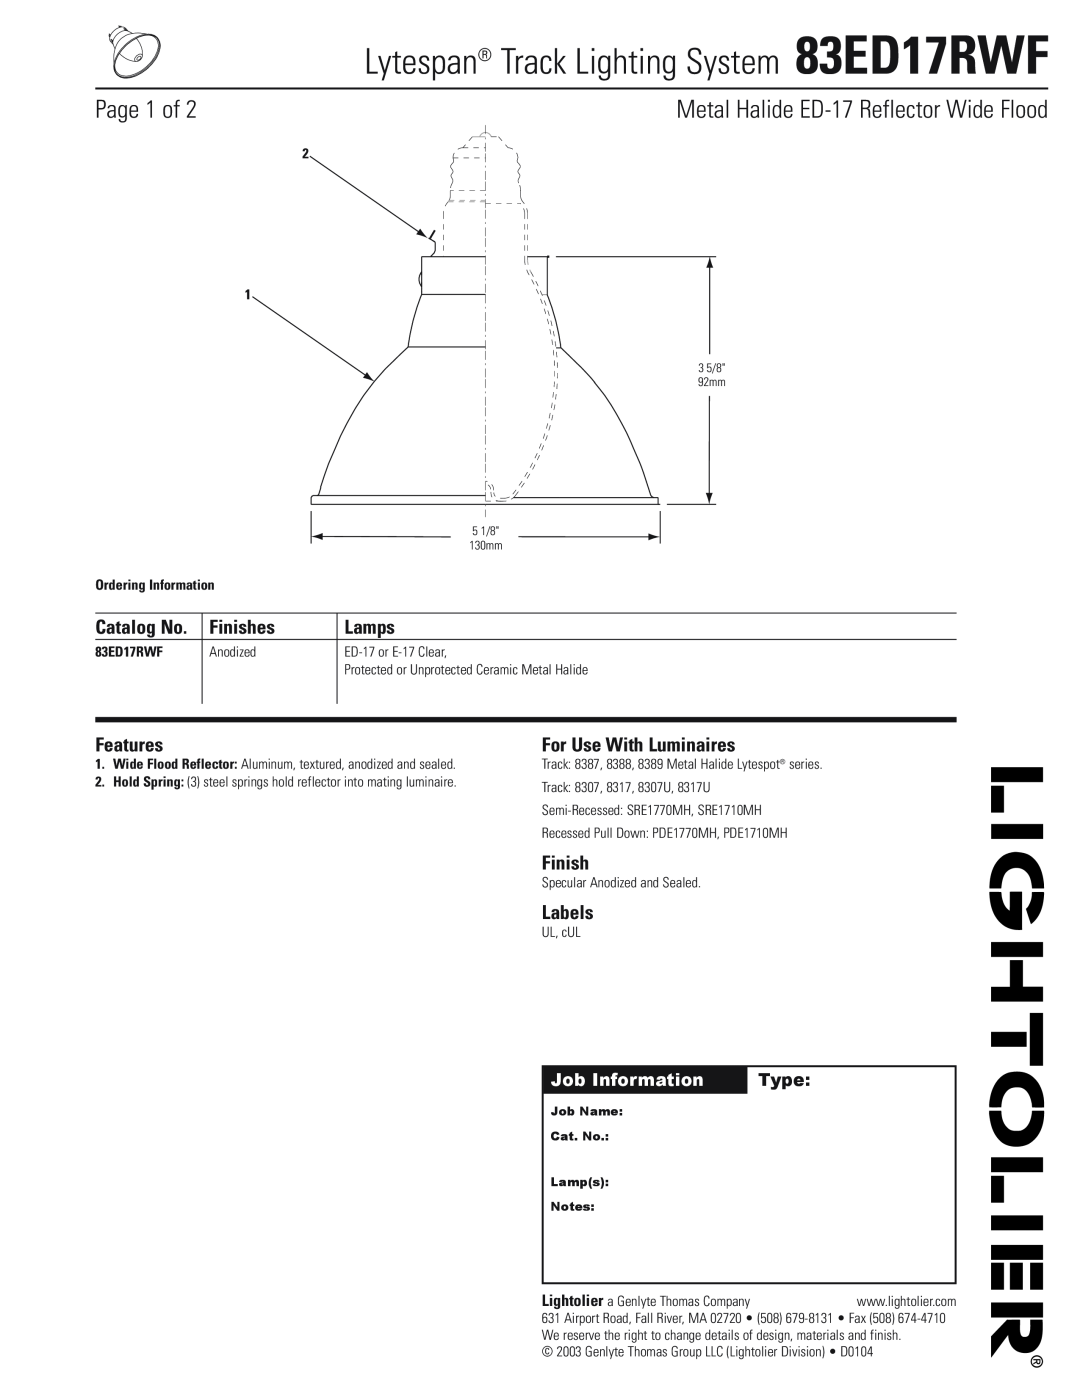 Lightolier 83ED17RWF manual Finishes, Lamps, Features, For Use With Luminaires, Labels, Job Information, Type, Page 1 of 